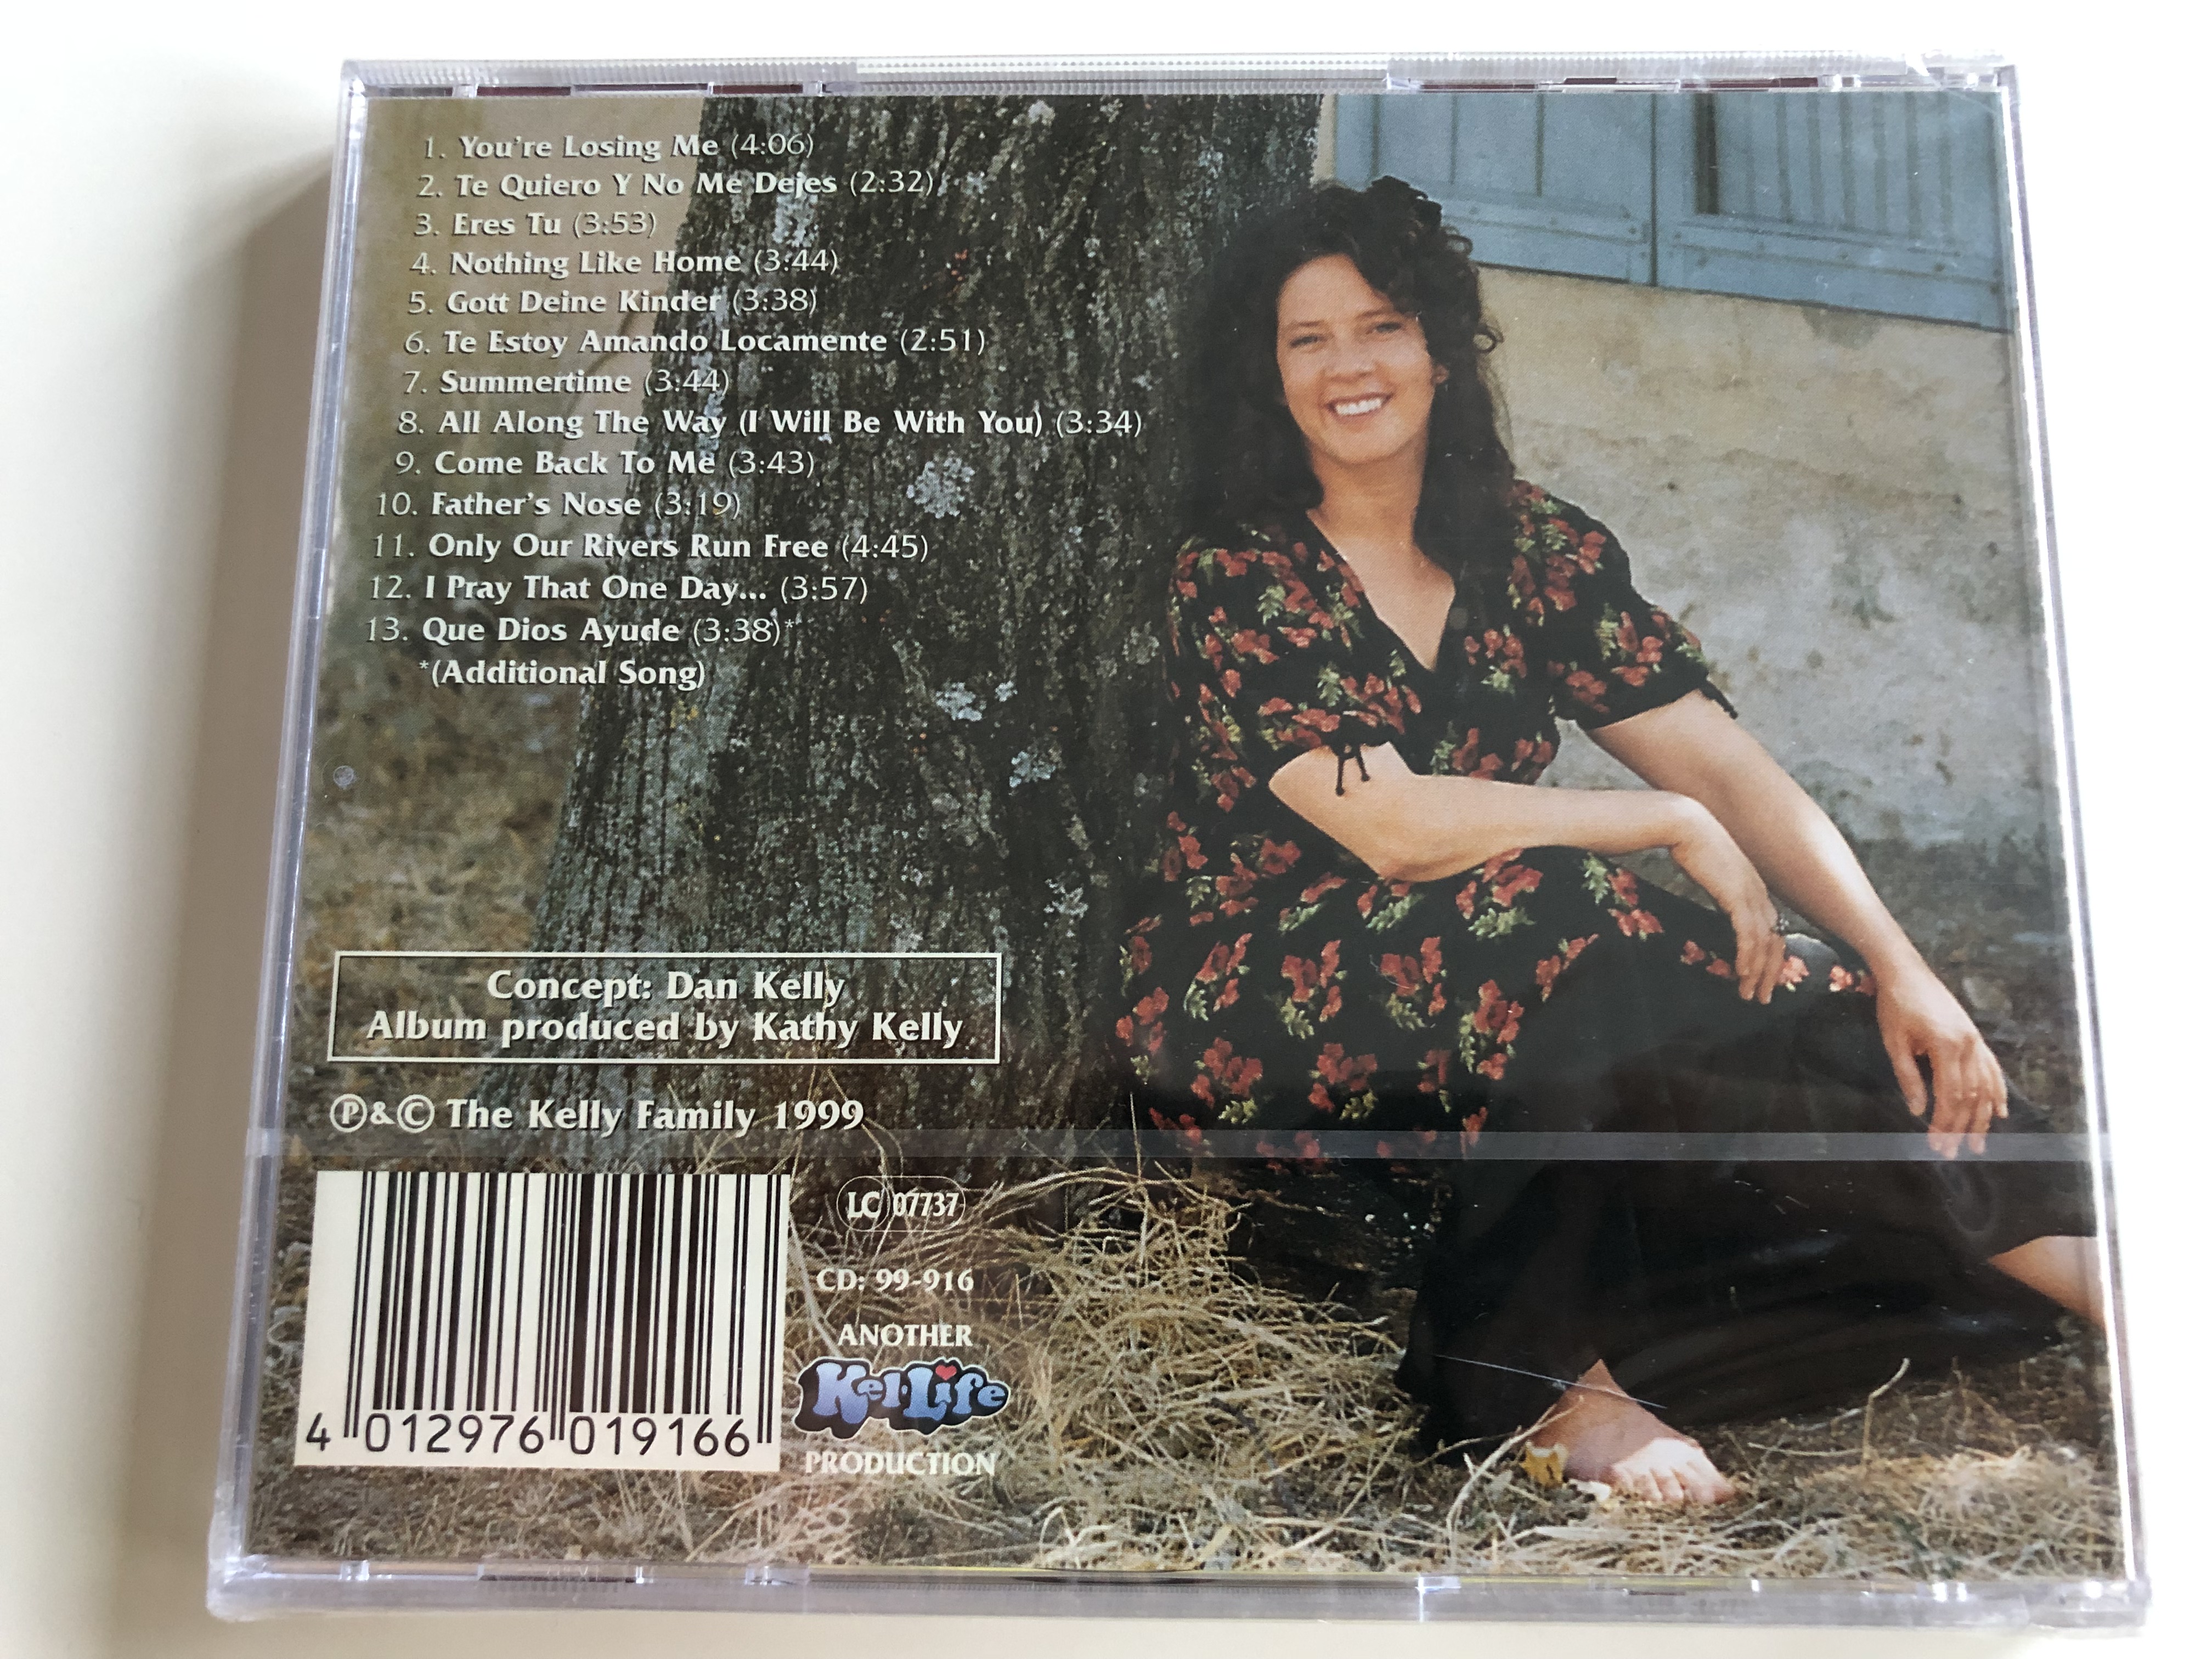 the-best-of-kathy-kelly-the-kelly-family-audio-cd-1999-including-5-new-songs-cd-99-916-2-.jpg